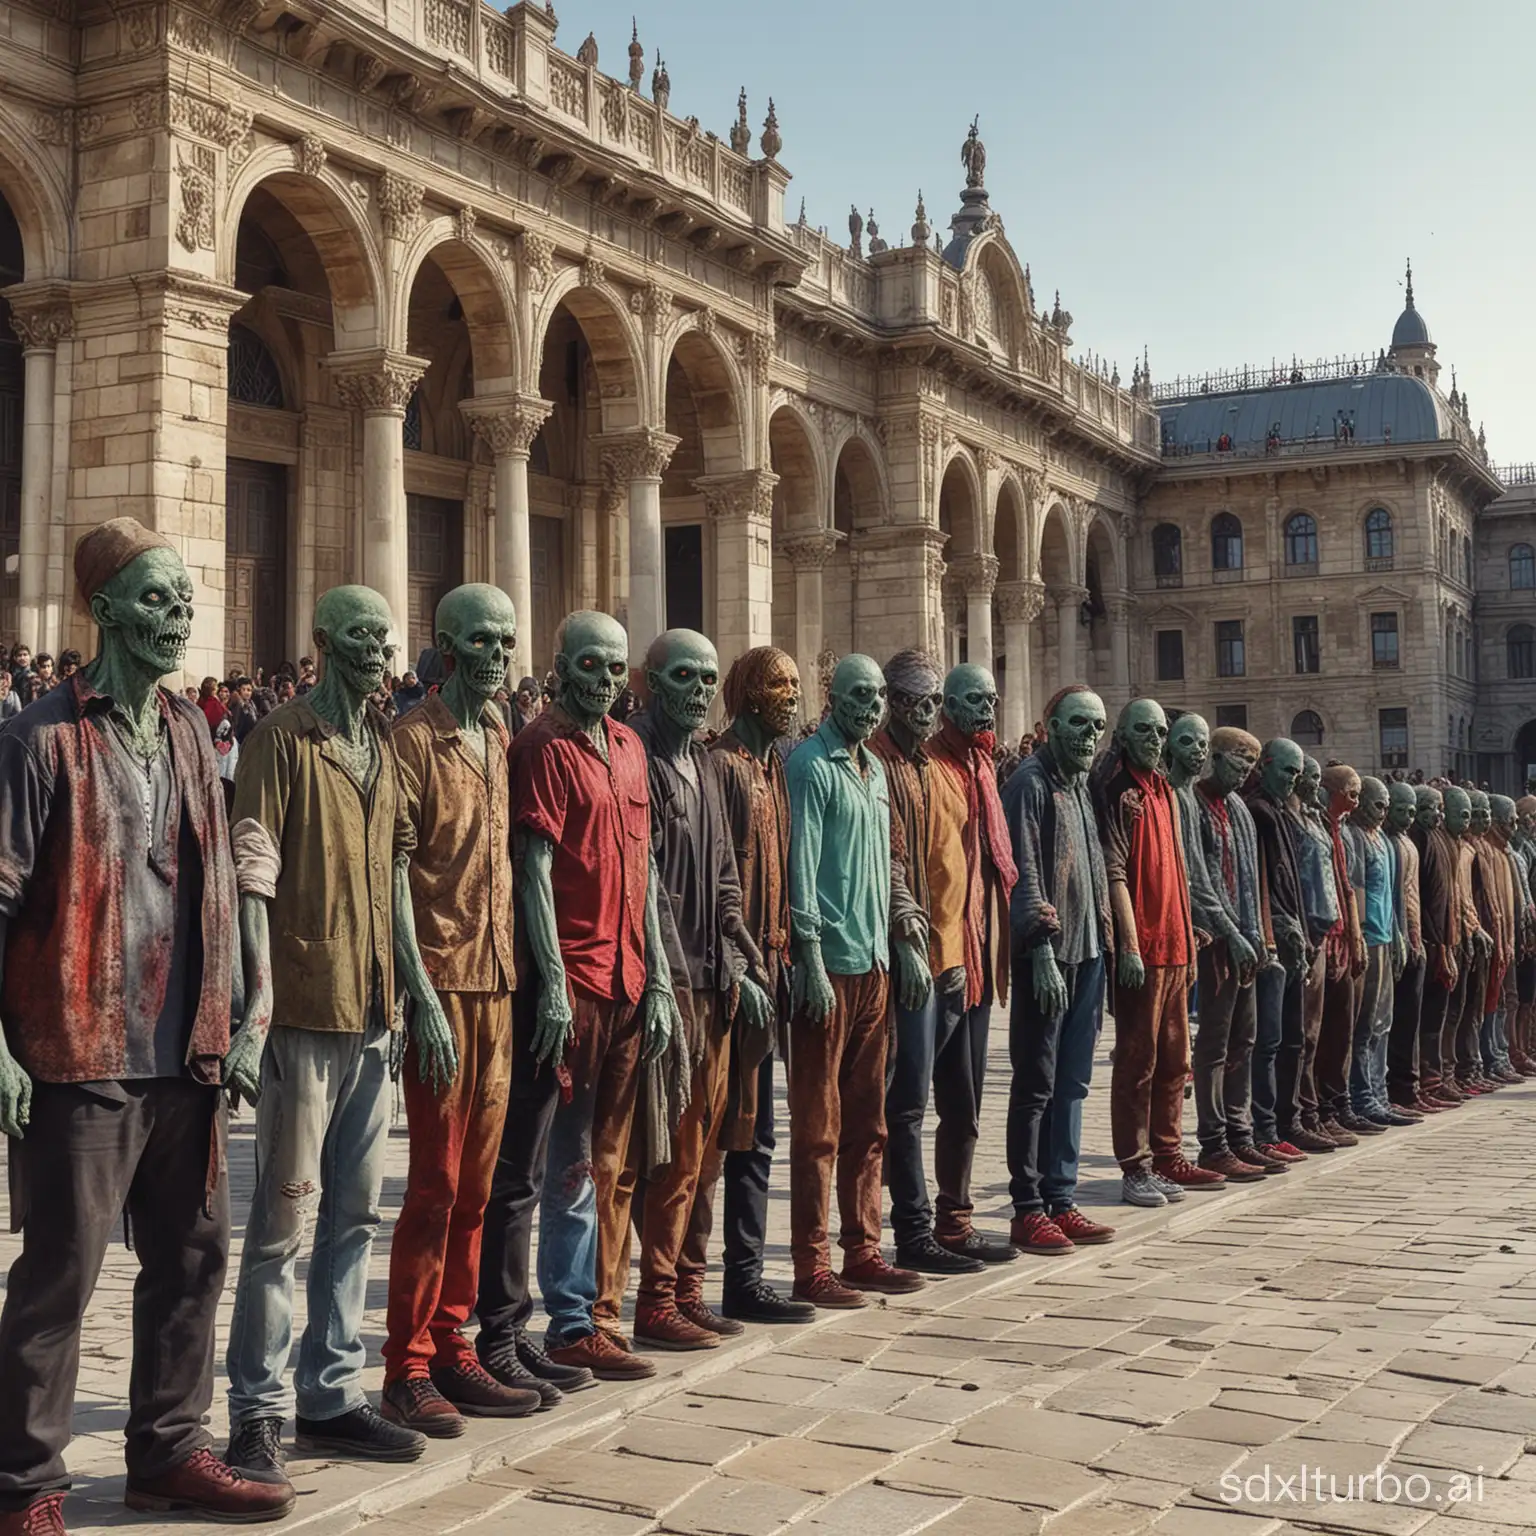 Realistic-and-Colorful-Zombies-Queue-at-Istanbul-Topraklar-Palace